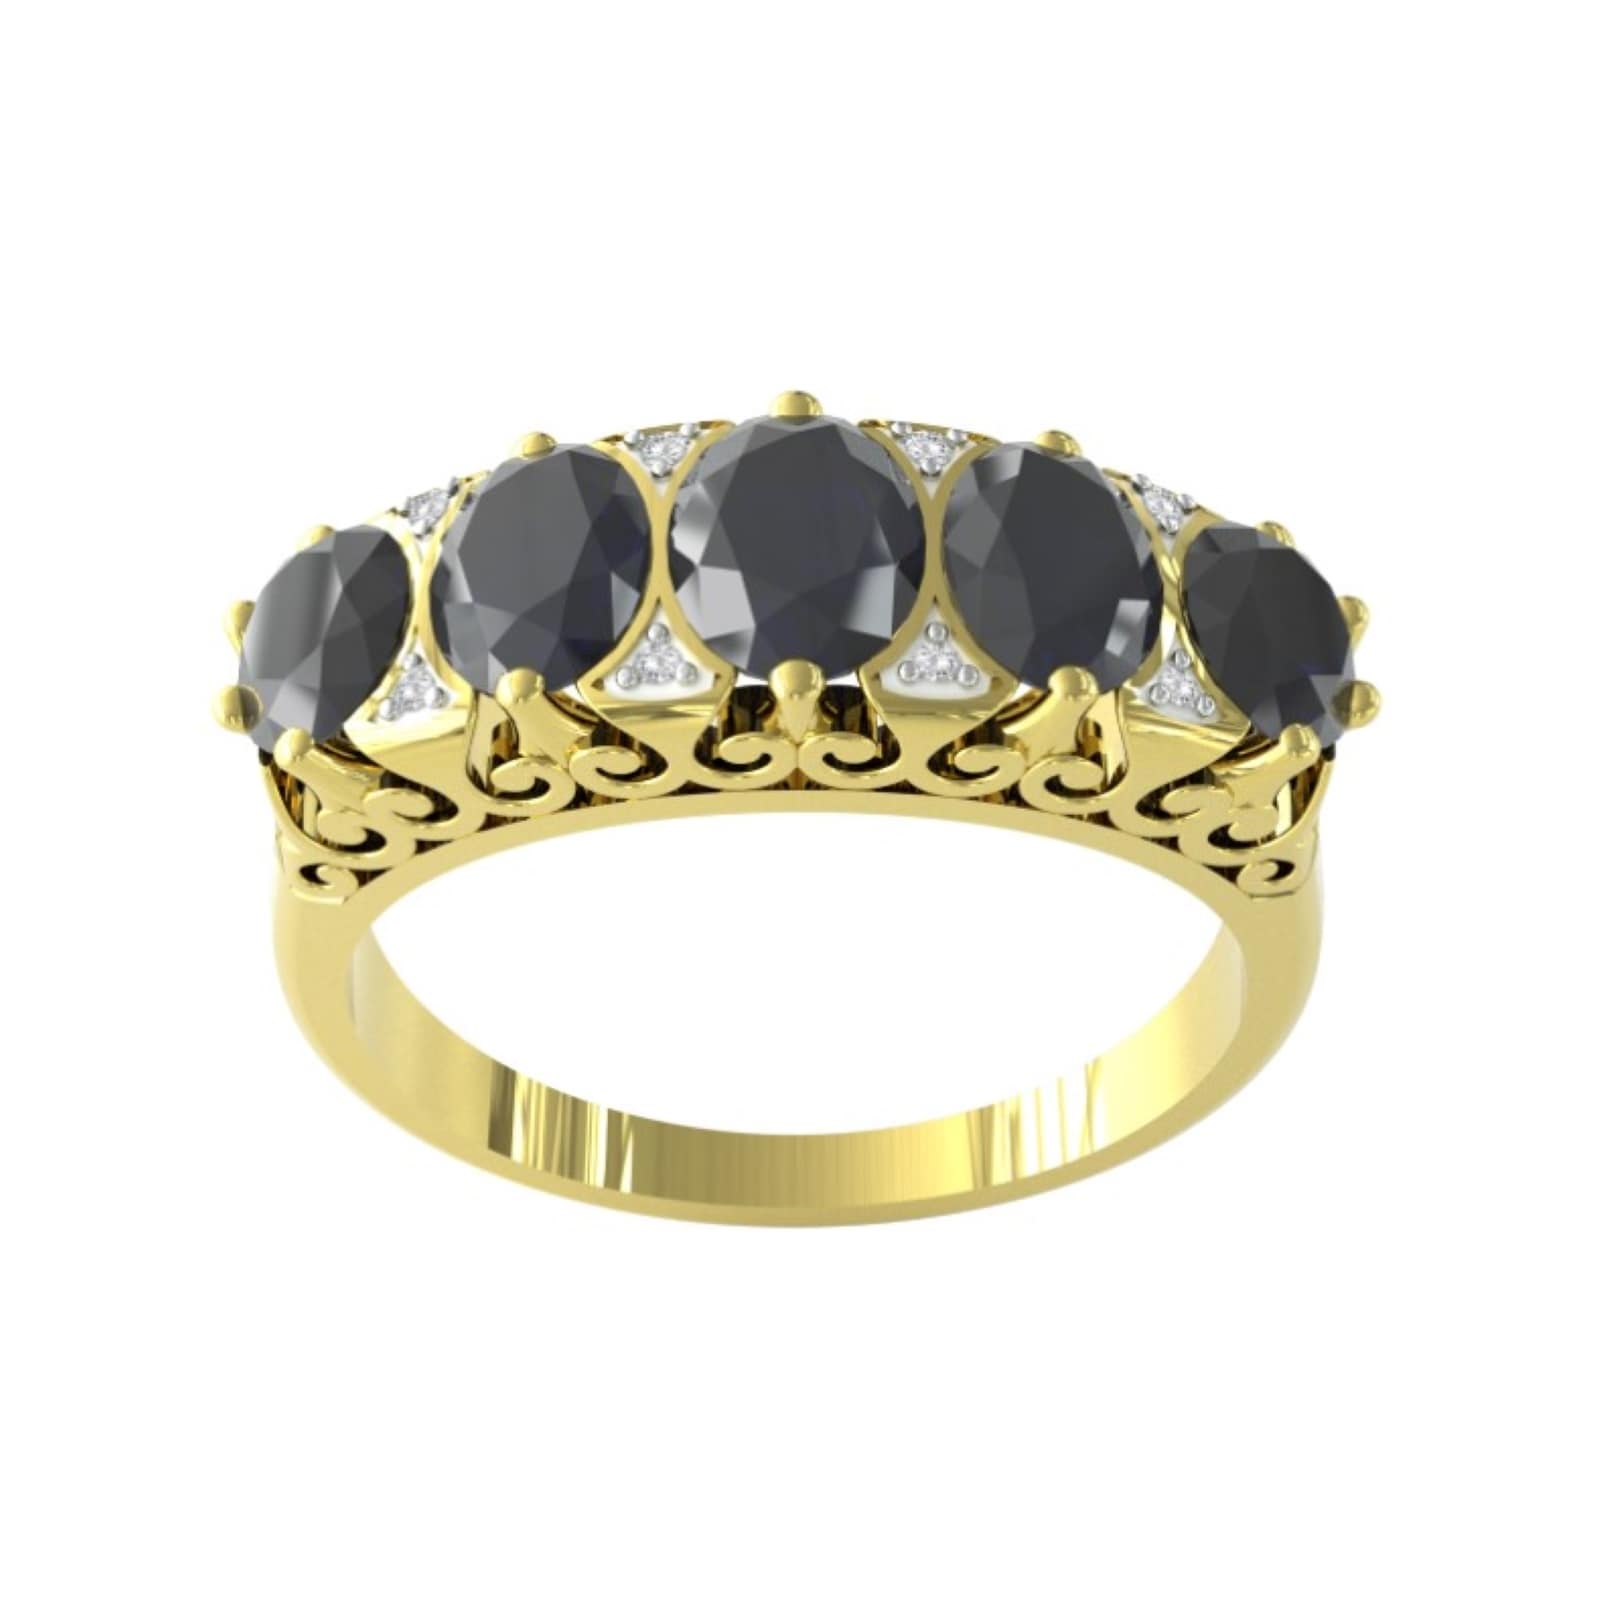 9ct Yellow Gold Victorian Style Sapphire & Diamond 5 Stone Ring - Ring Size D.5